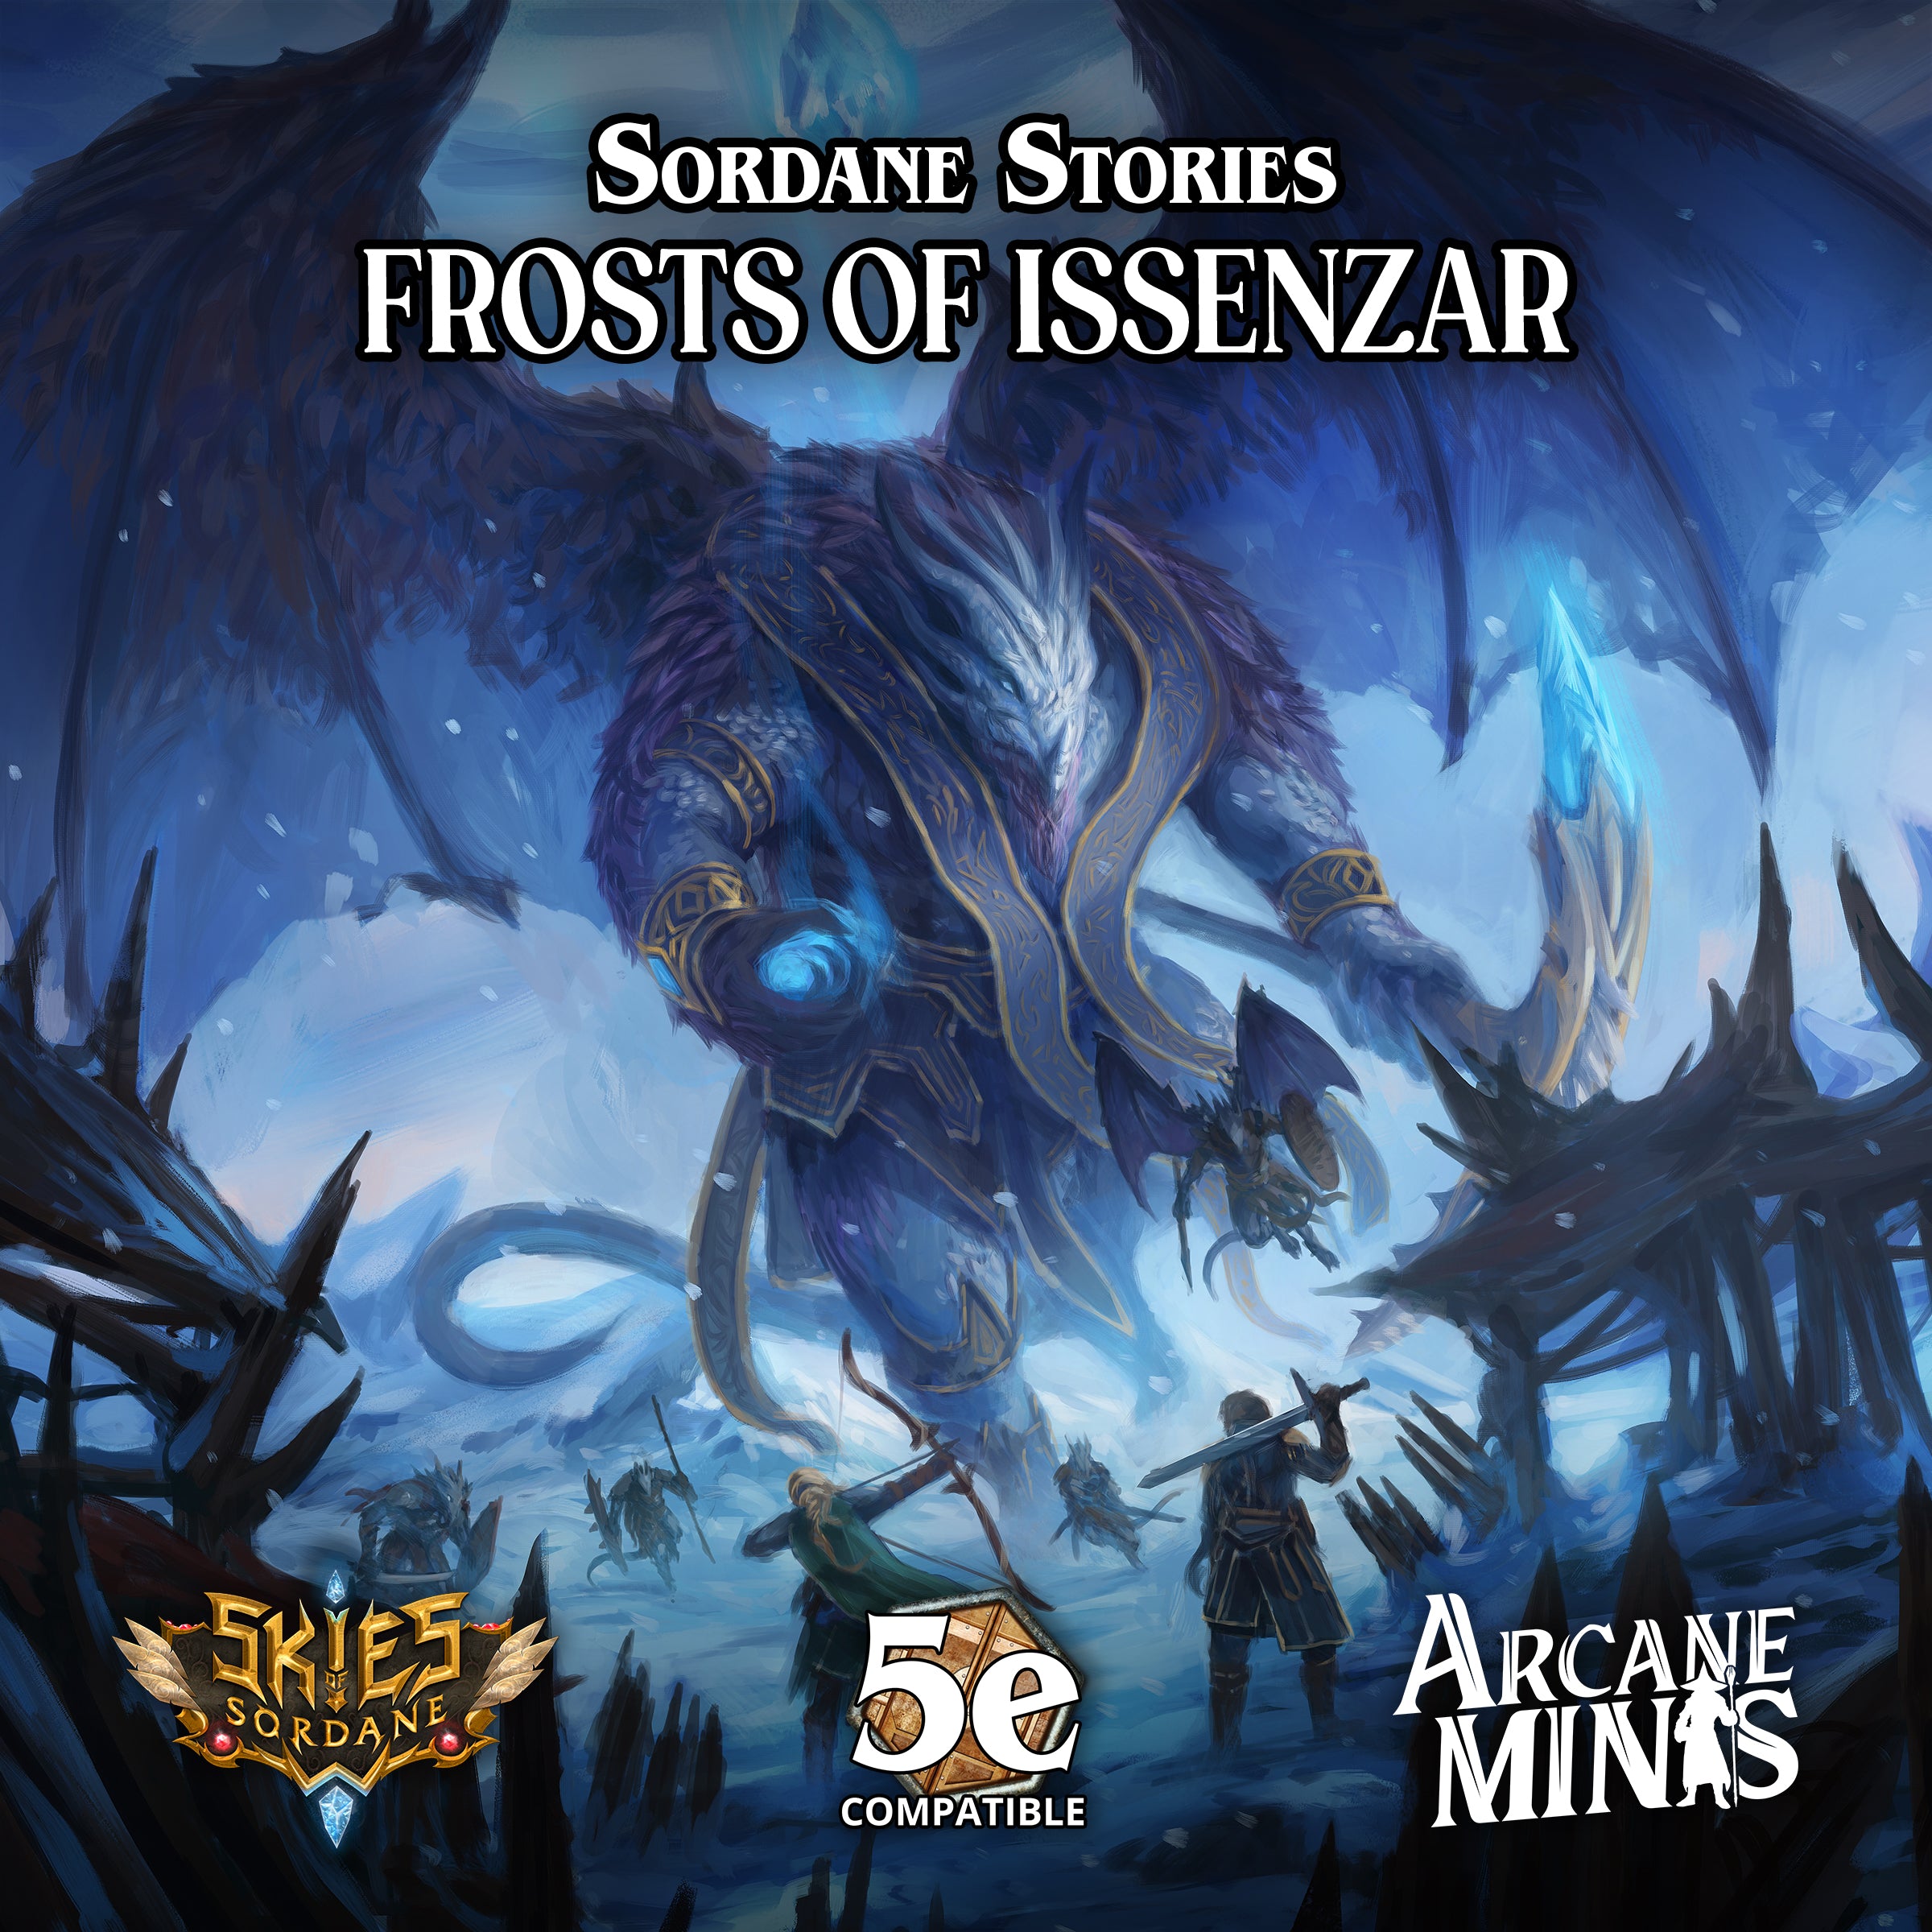 Frosts of Issenzar - A Sordane Stories 5e Adventure